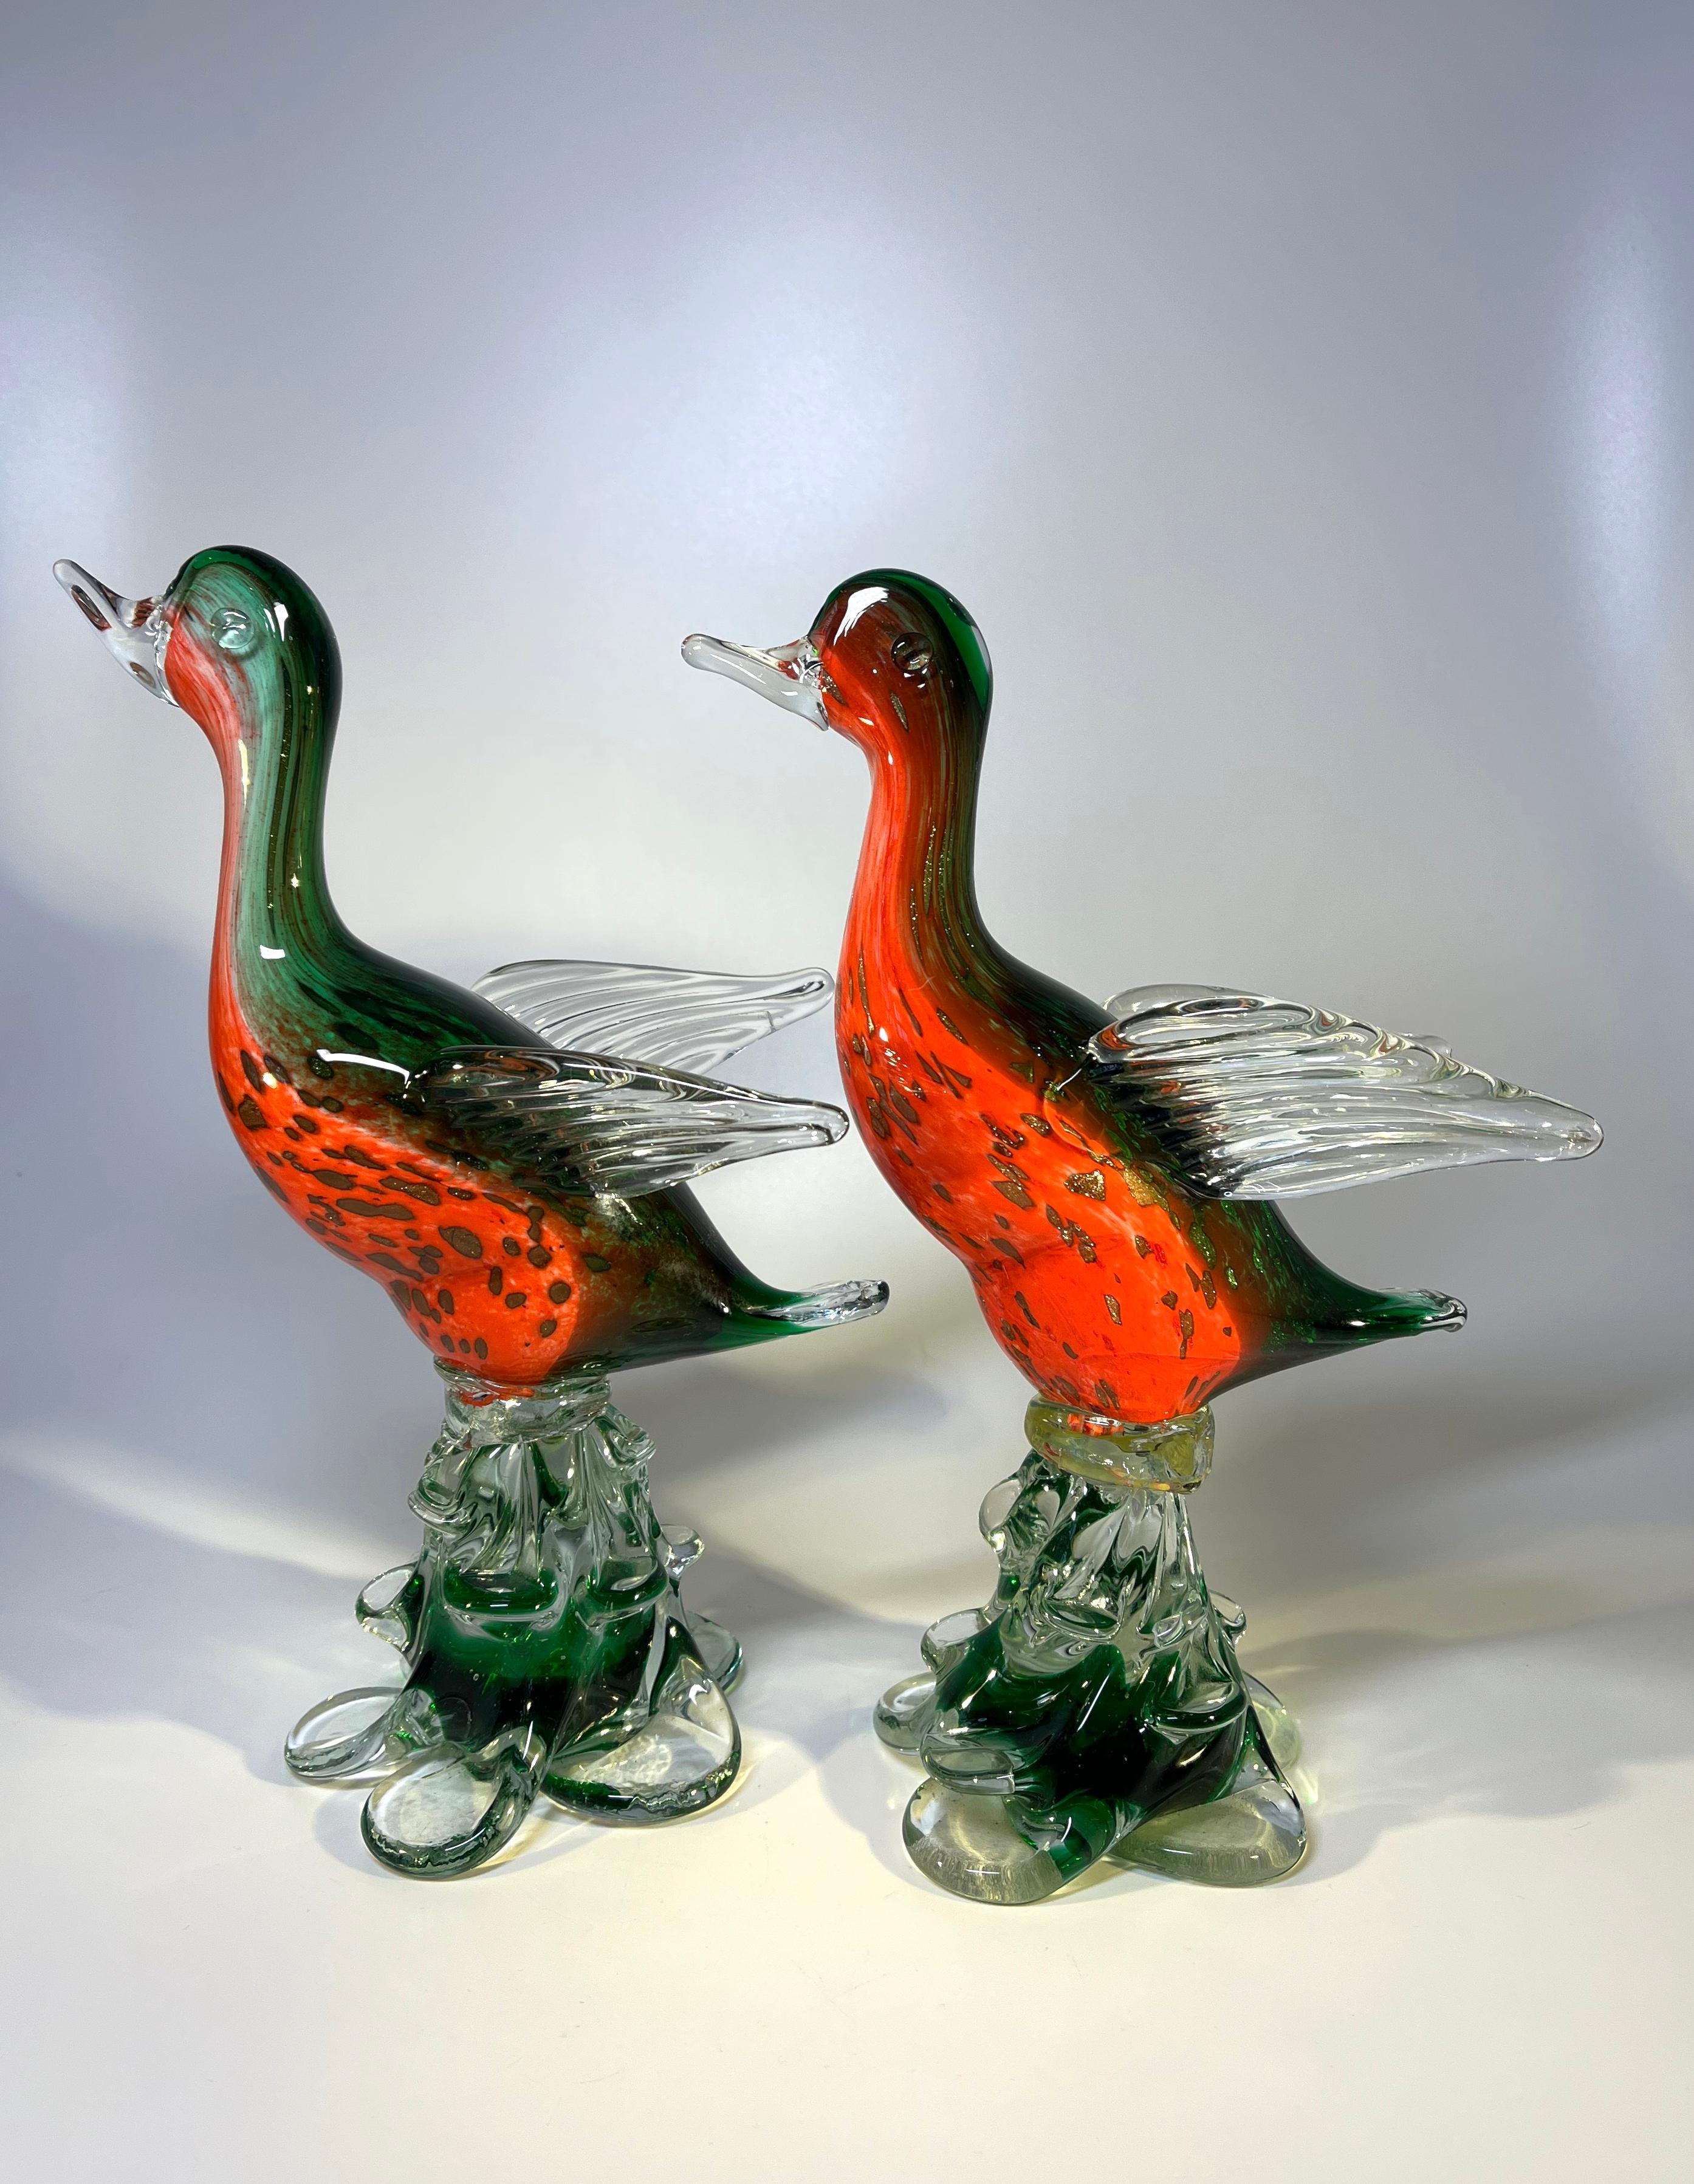 Hand-Crafted Handsome Pair of Vintage Venetian Glass Birds, Murano Hand Blown circa 1960s For Sale